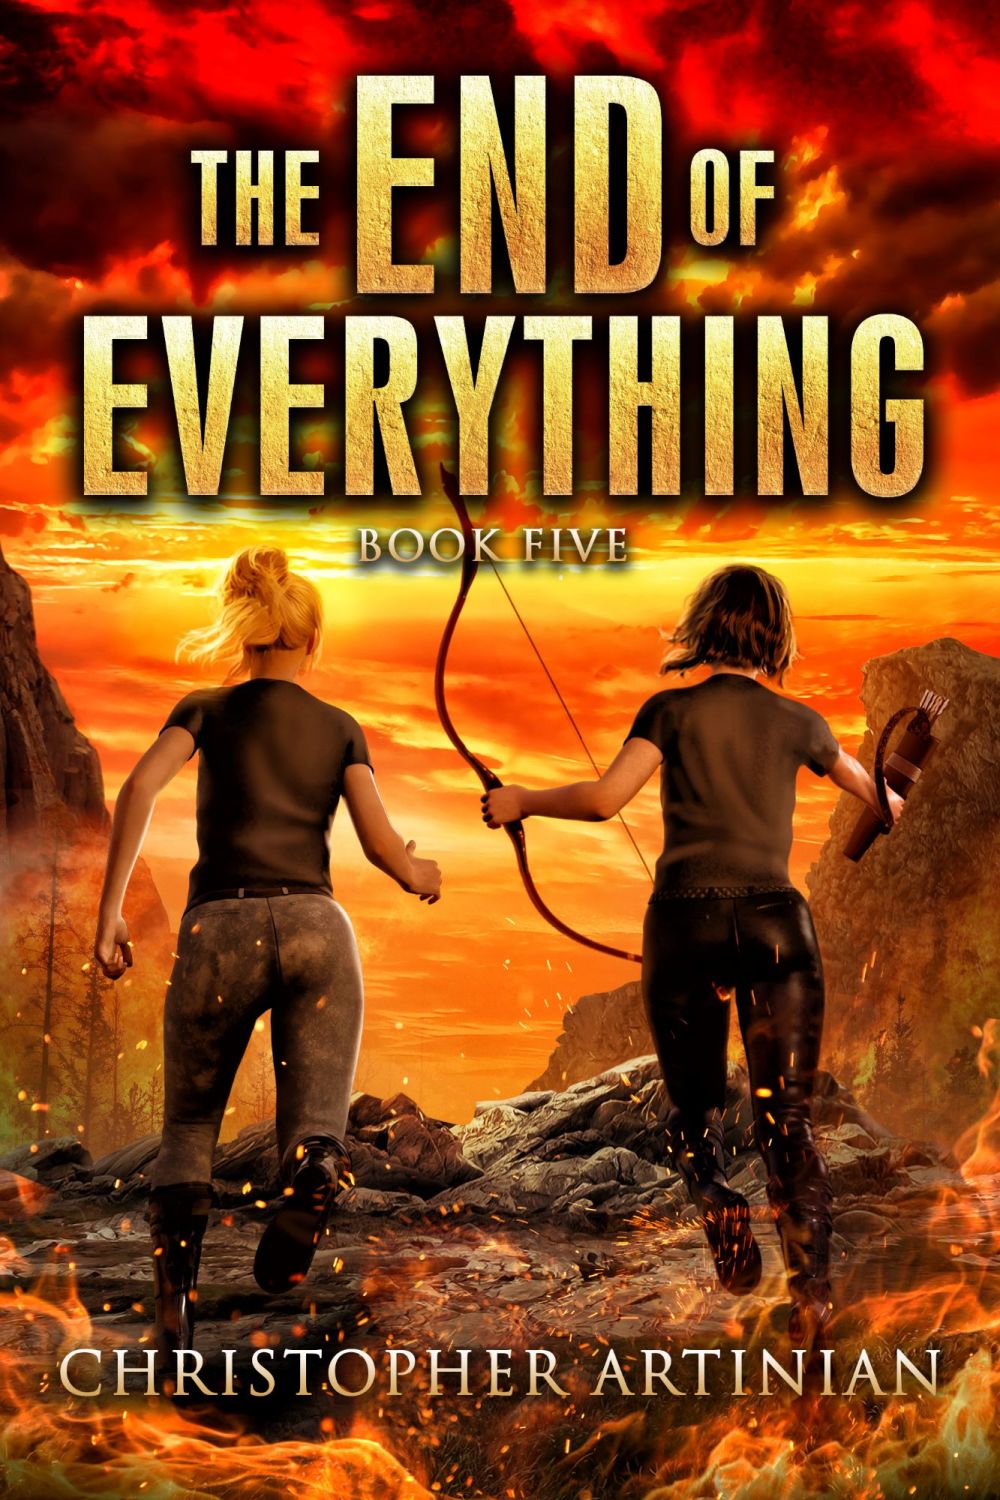 The End of the End of Everything by Dale Bailey